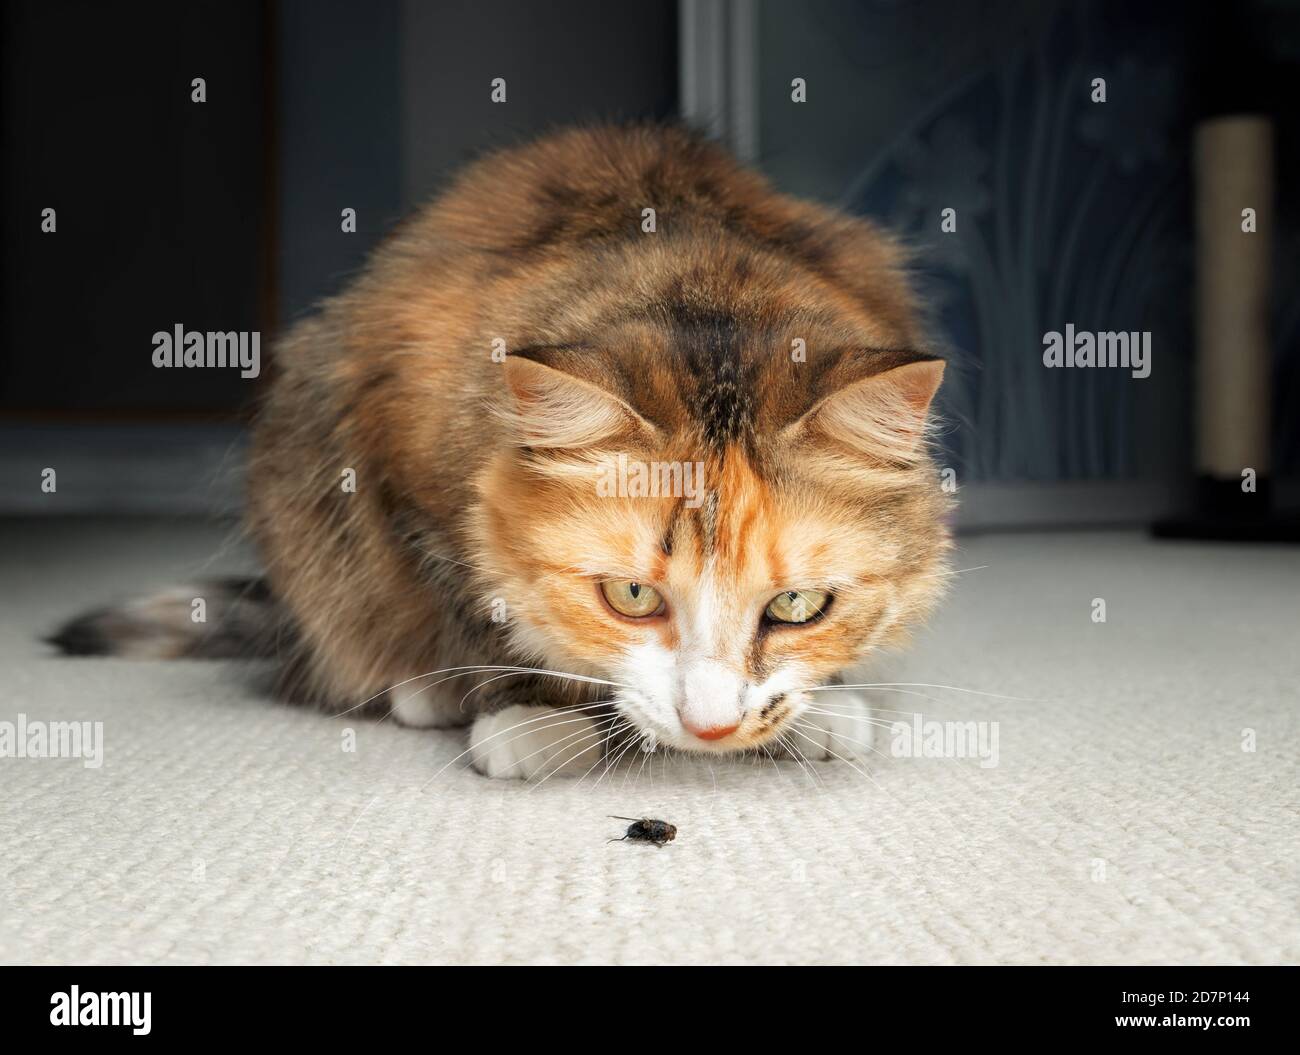 Cat hunting a fly. Multicolored female cat is sitting in front of an insect on the carpet, ready to pounce when it moves. Superior fly catcher. Stock Photo